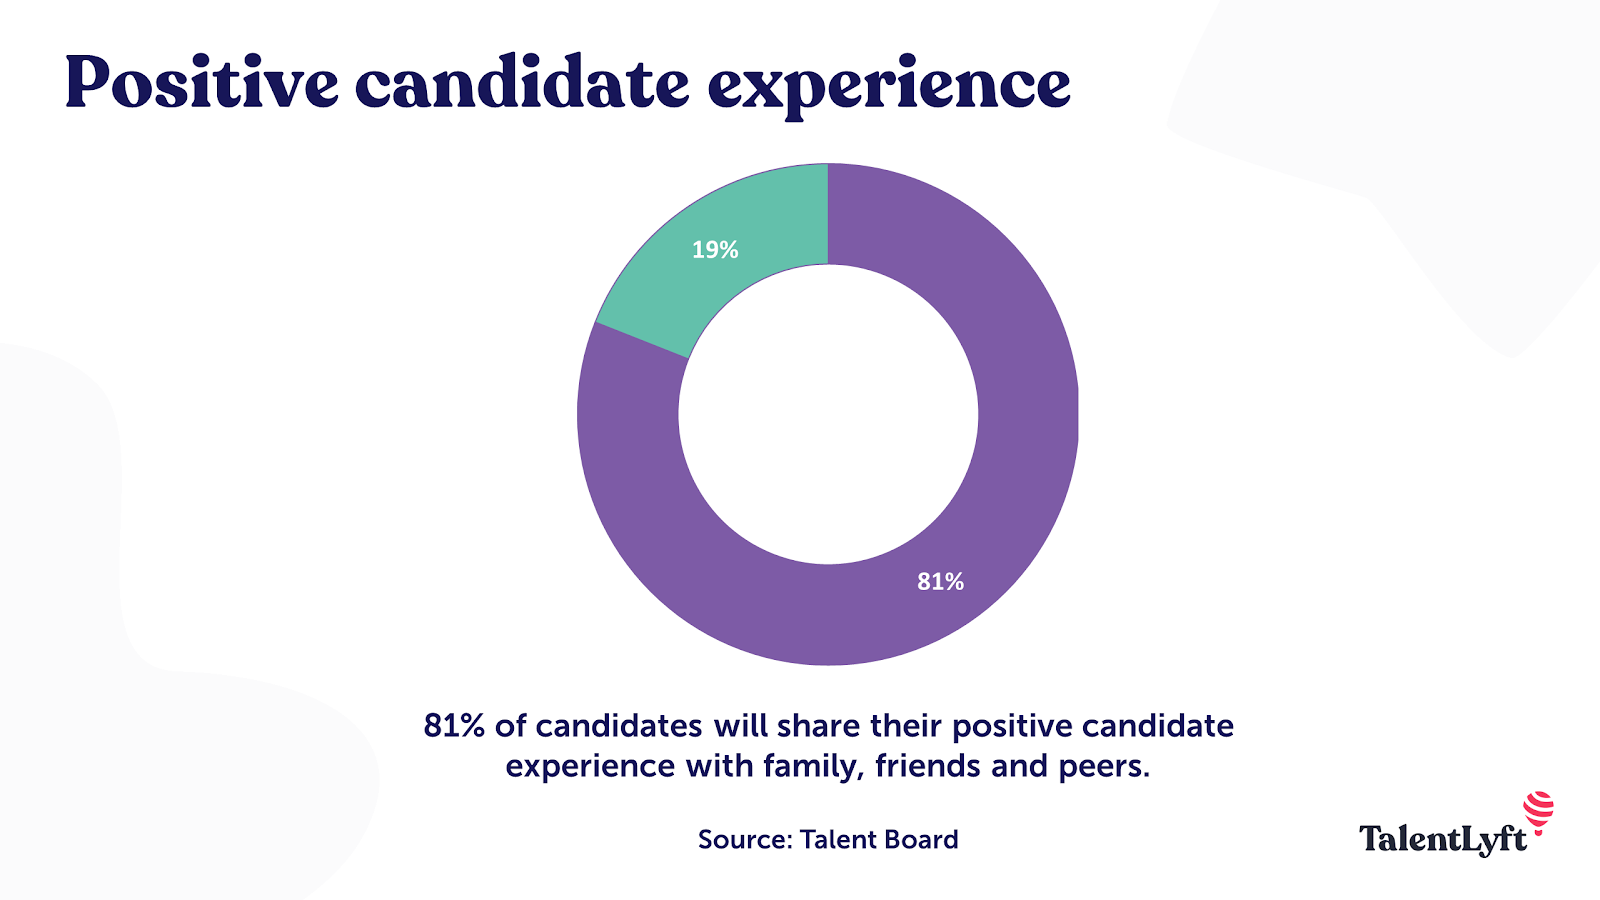 Positive candidate experience - a necessity in tech recruiting